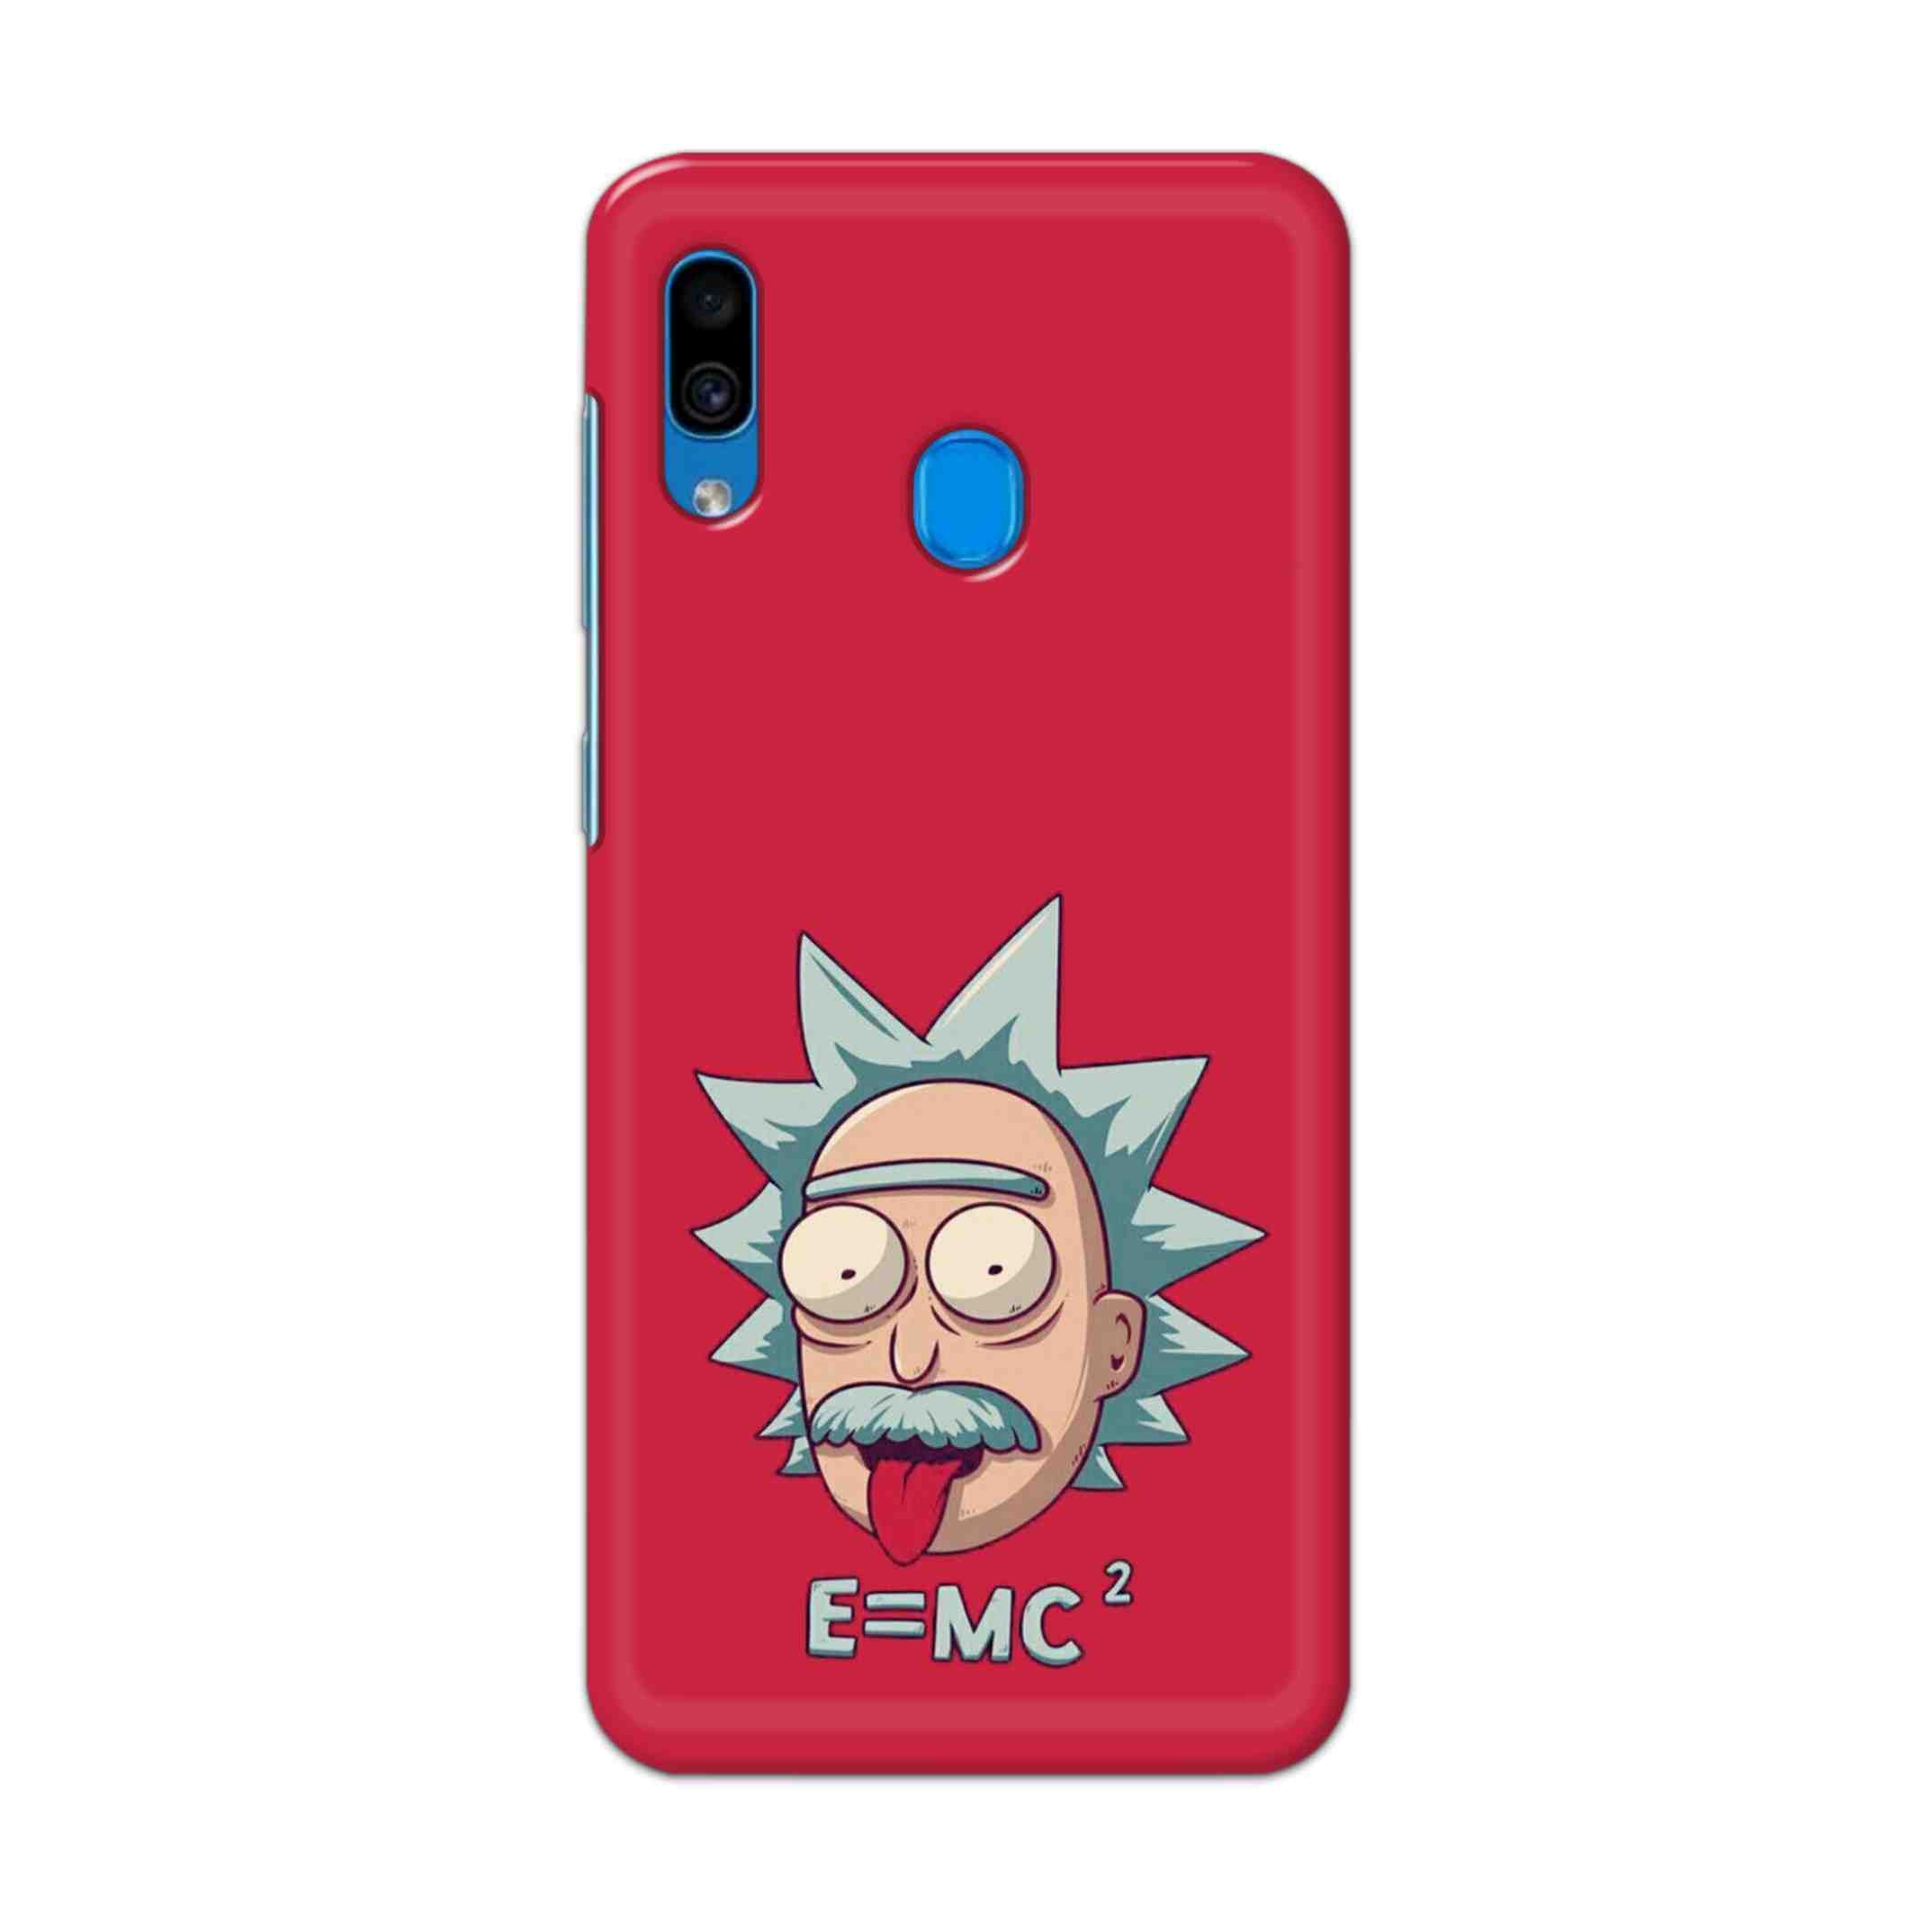 Buy E=Mc Hard Back Mobile Phone Case Cover For Samsung Galaxy A30 Online